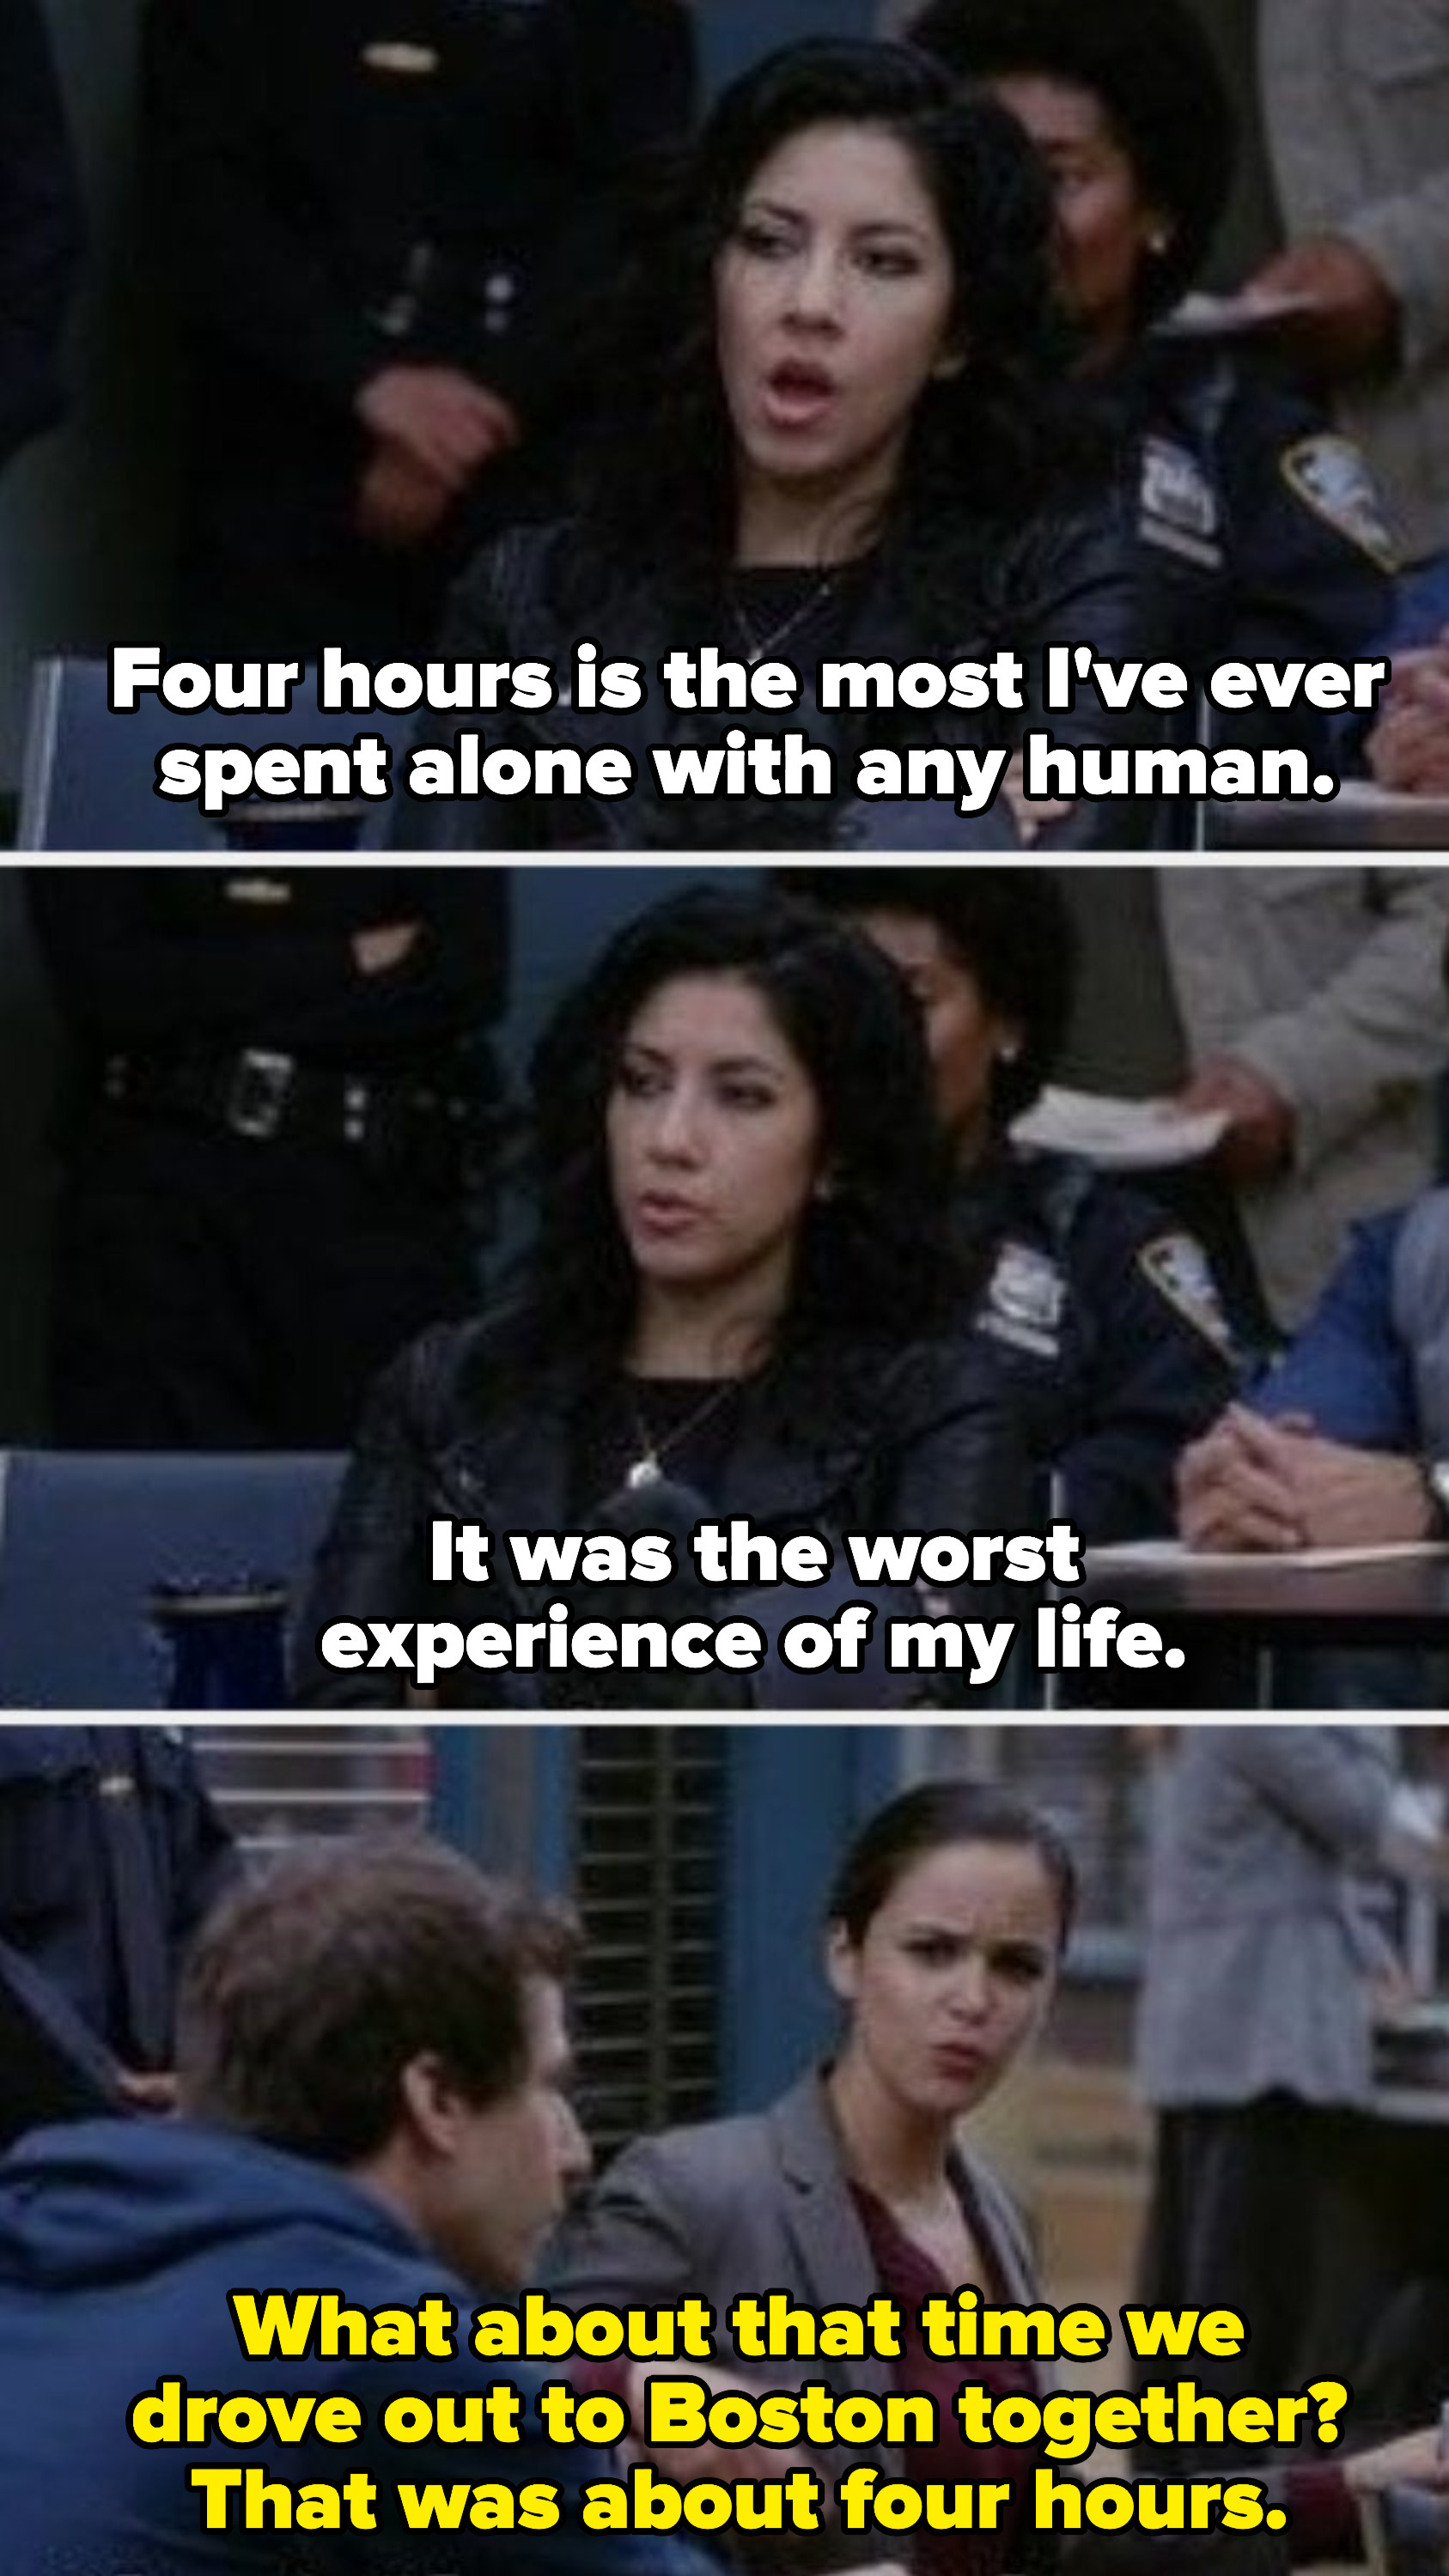 Rosa: &quot;Four hours is the most I&#x27;ve ever spent alone with any human. It was the worst experience of my life.&quot; Amy: &quot;What about that time we drove out to Boston together? That was about four hours.&quot;